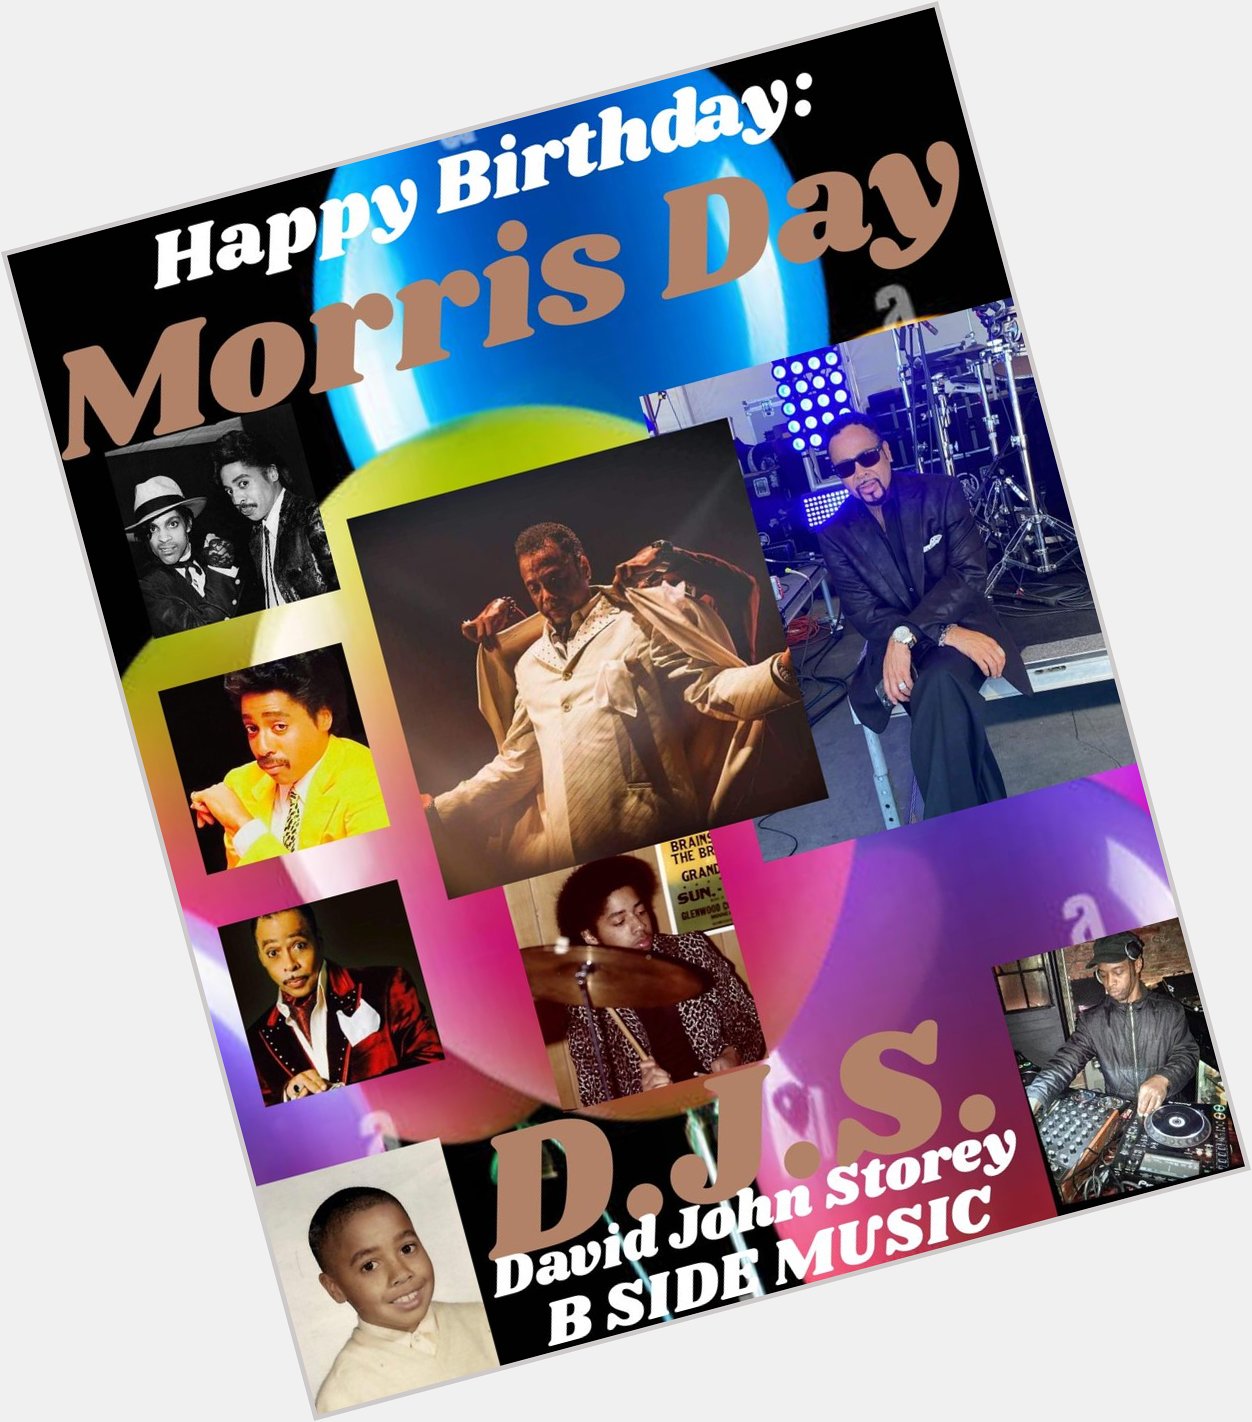 I(D.J.S.)\"B SIDE\" taking time to say Happy Birthday to Dummer/Singer/Entertainer/Actor: \"MORRIS DAY\"!!! 